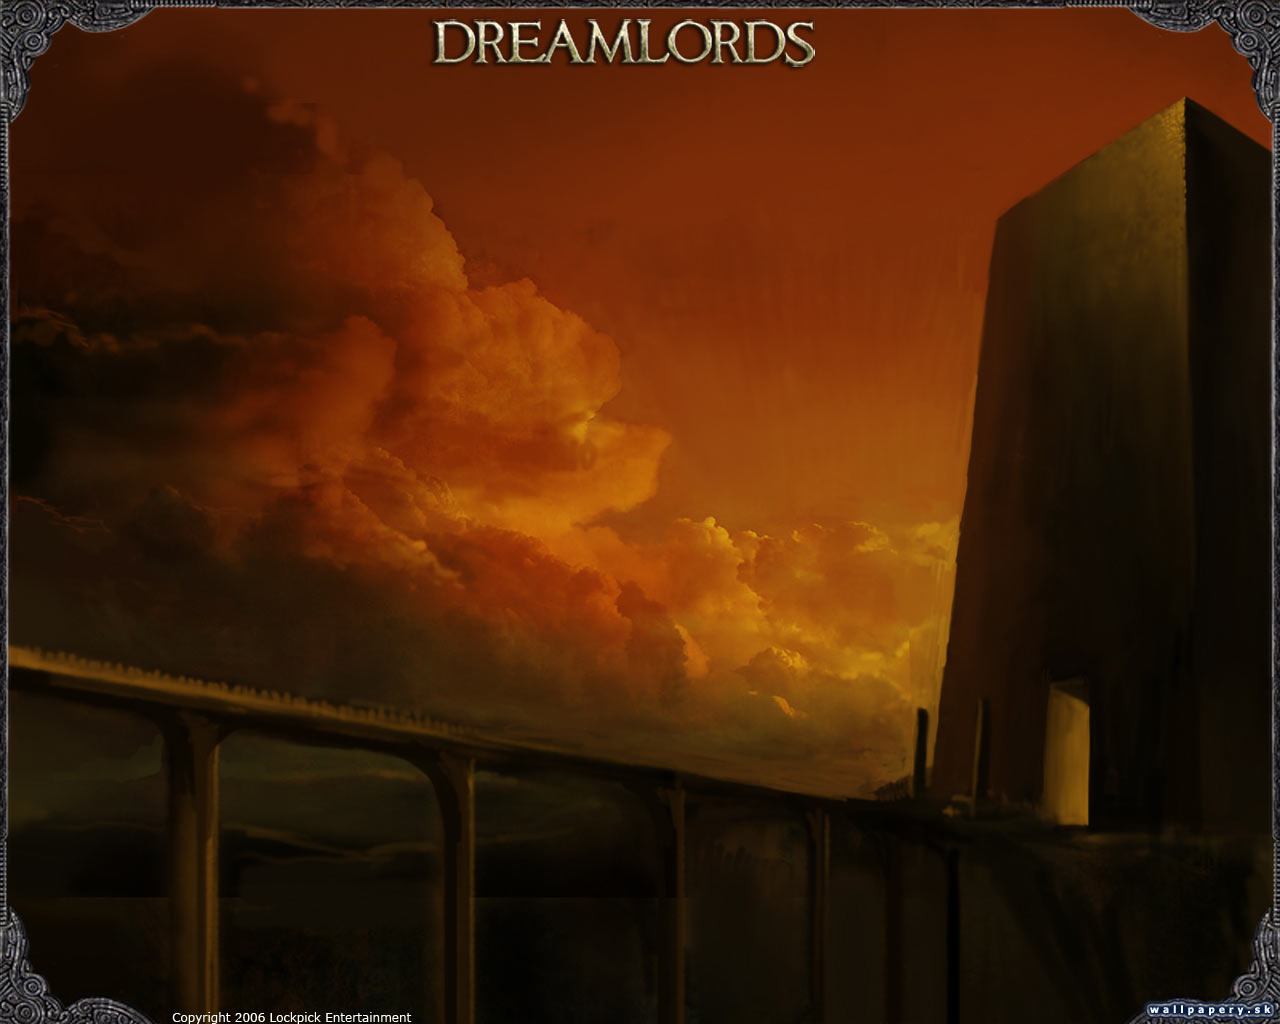 Dreamlords - wallpaper 4